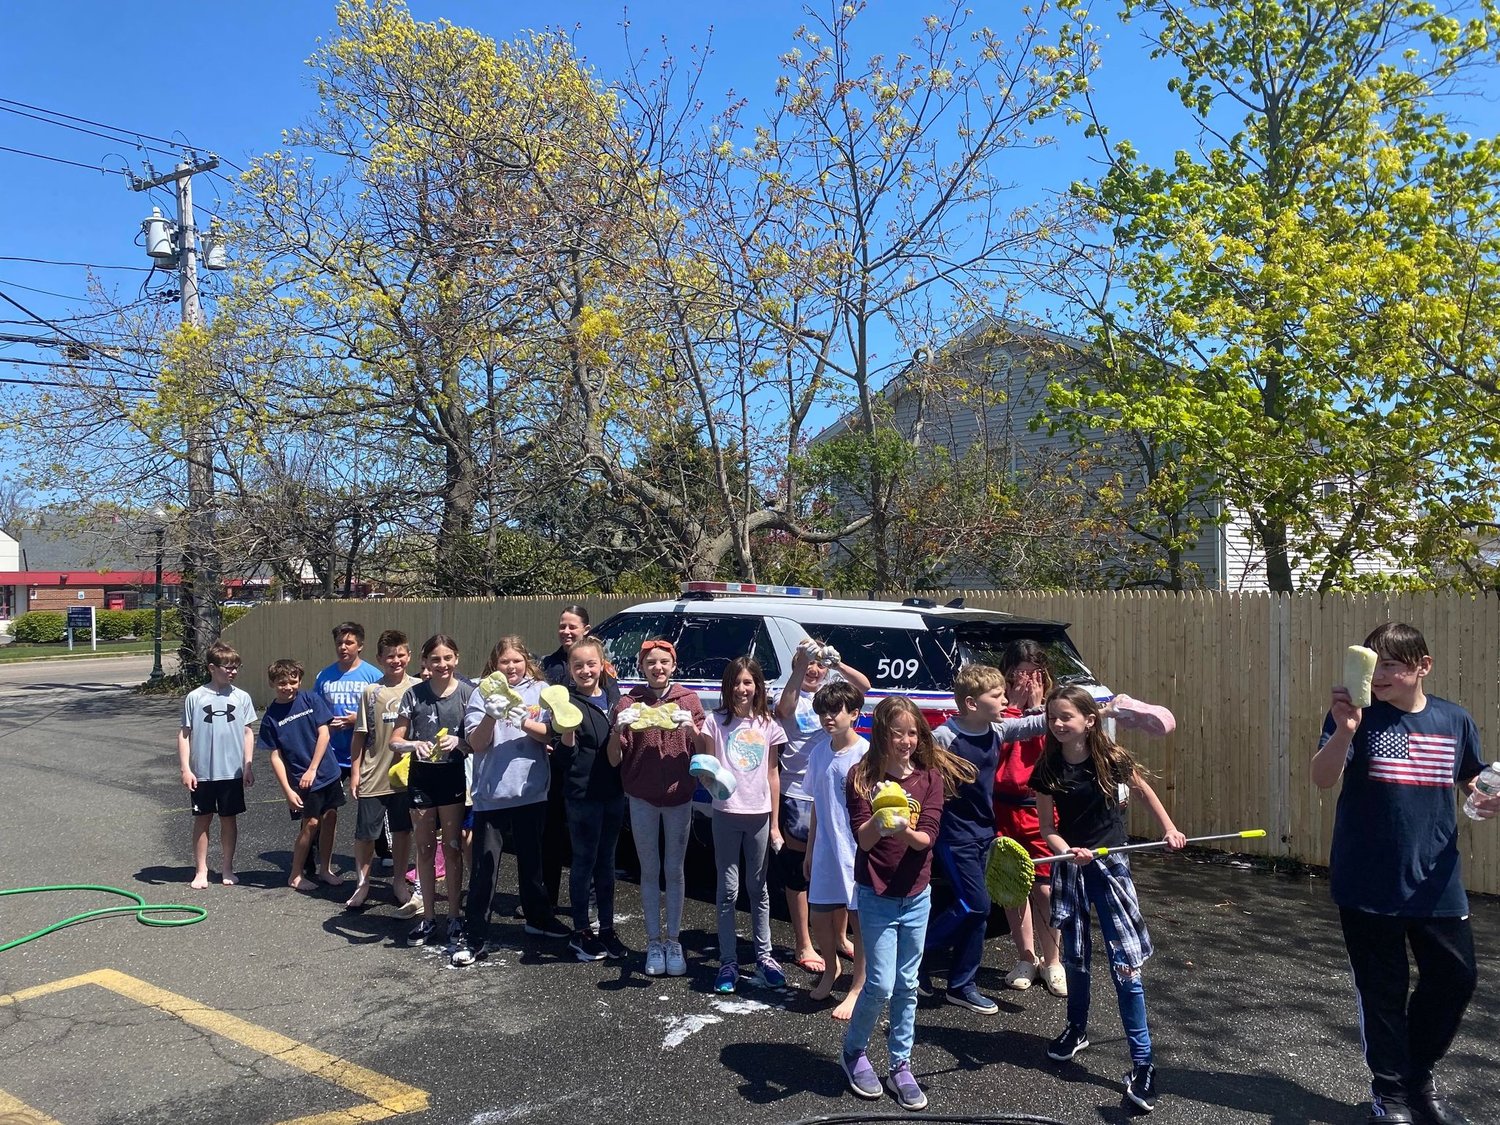 Blue Point fifth graders host a car wash this spring, and even receive a visit from a local police officer to get his squad car cleaned to serve the neighborhood.
“Geoghan Insurance has continued to be a supportive staple in this community by graciously allowing community organizations to use their property to raise tens of thousands of fundraised dollars!,” said Eric Ferraro